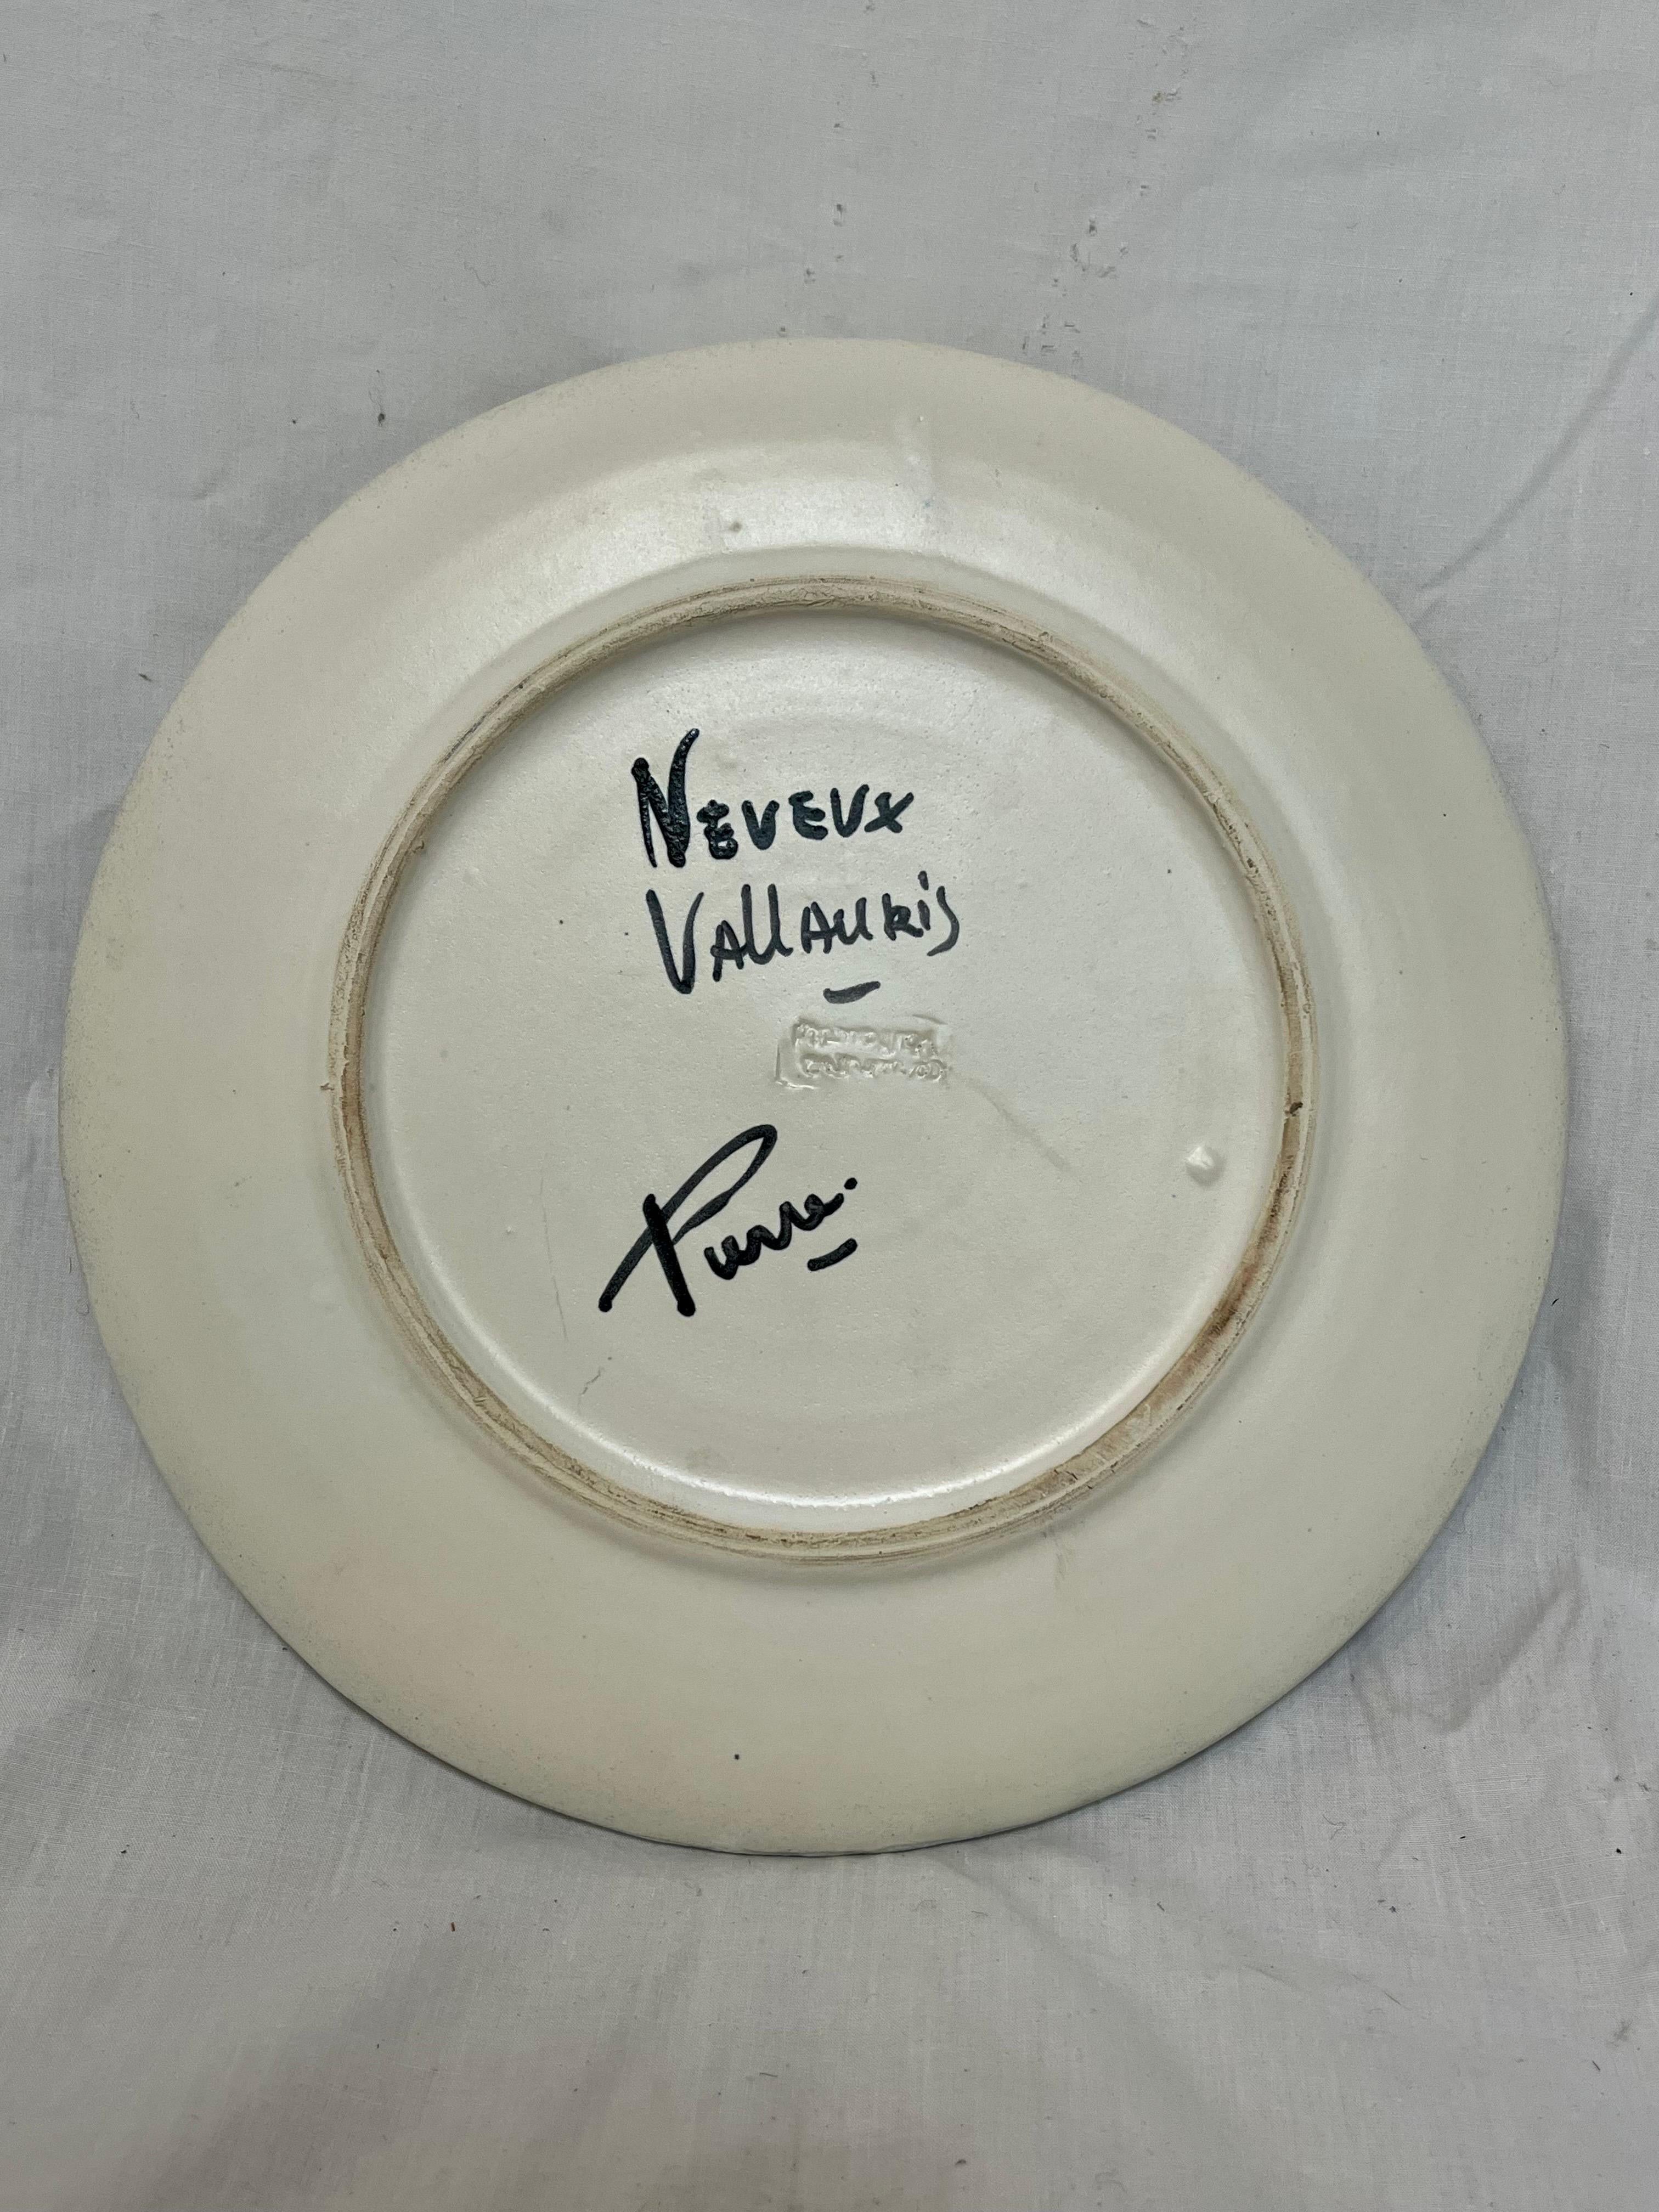 Atelier Cerenne Rene Neveux Vallauris French Ceramic Abstract Glazed Plate For Sale 3